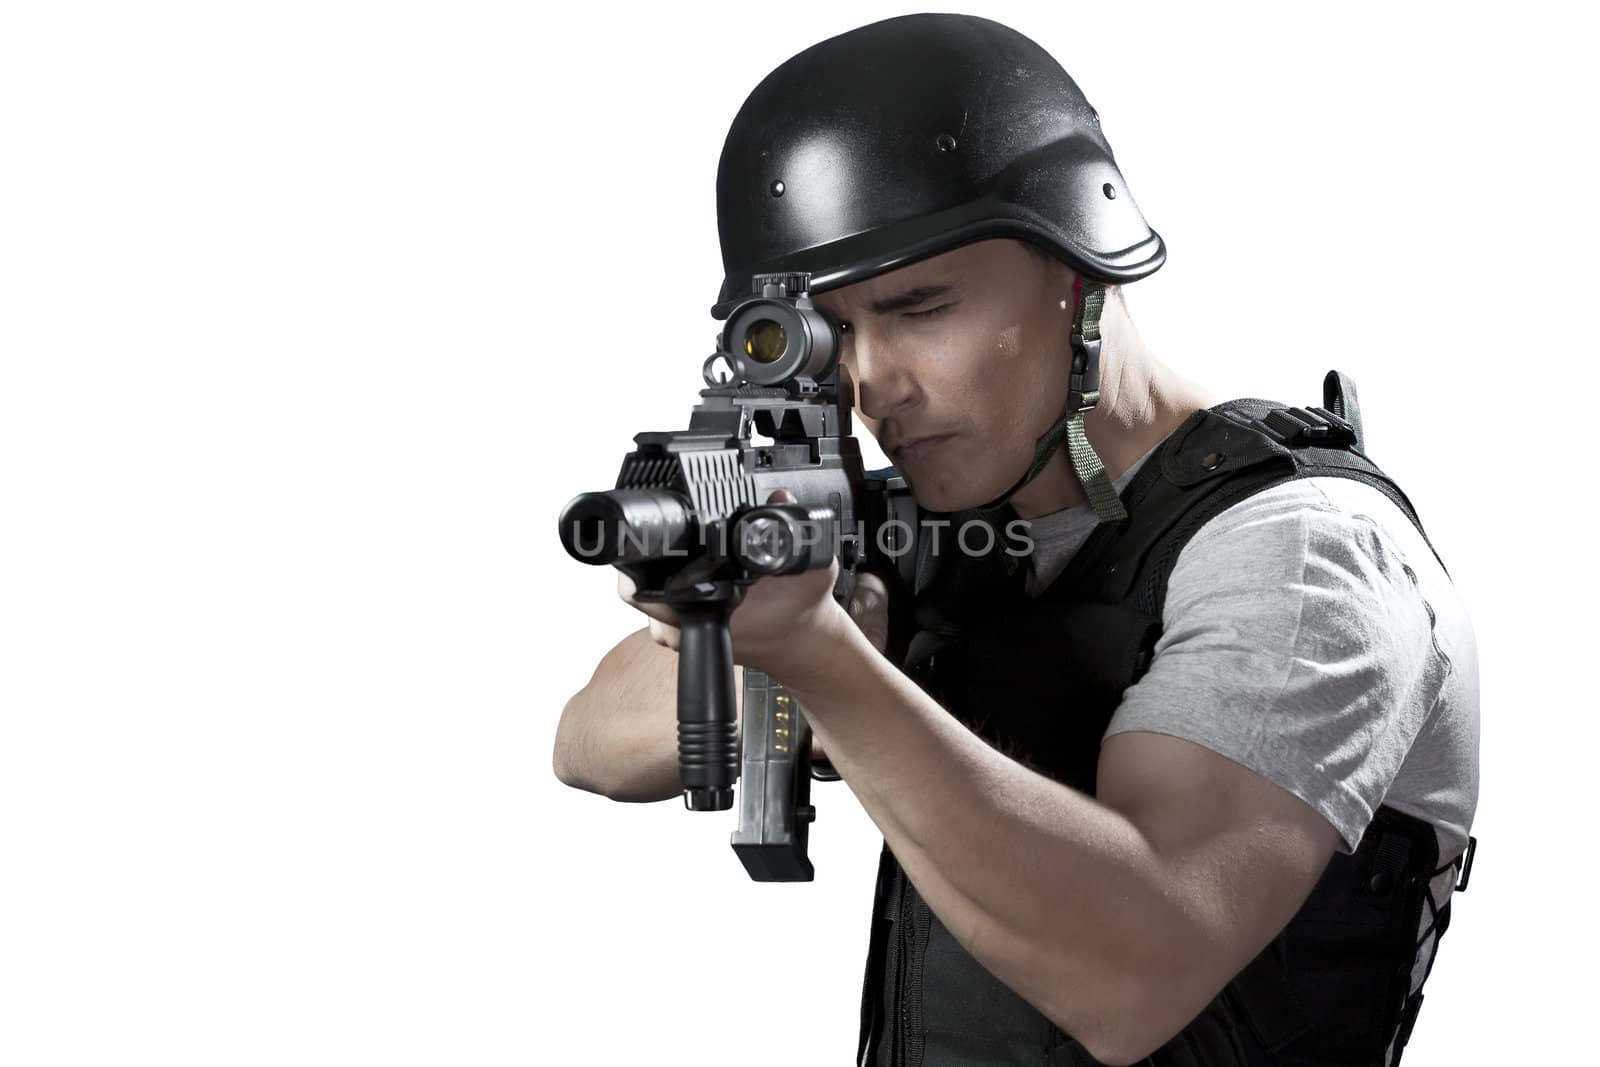 Armed policeman shooting, isolated on white by FernandoCortes